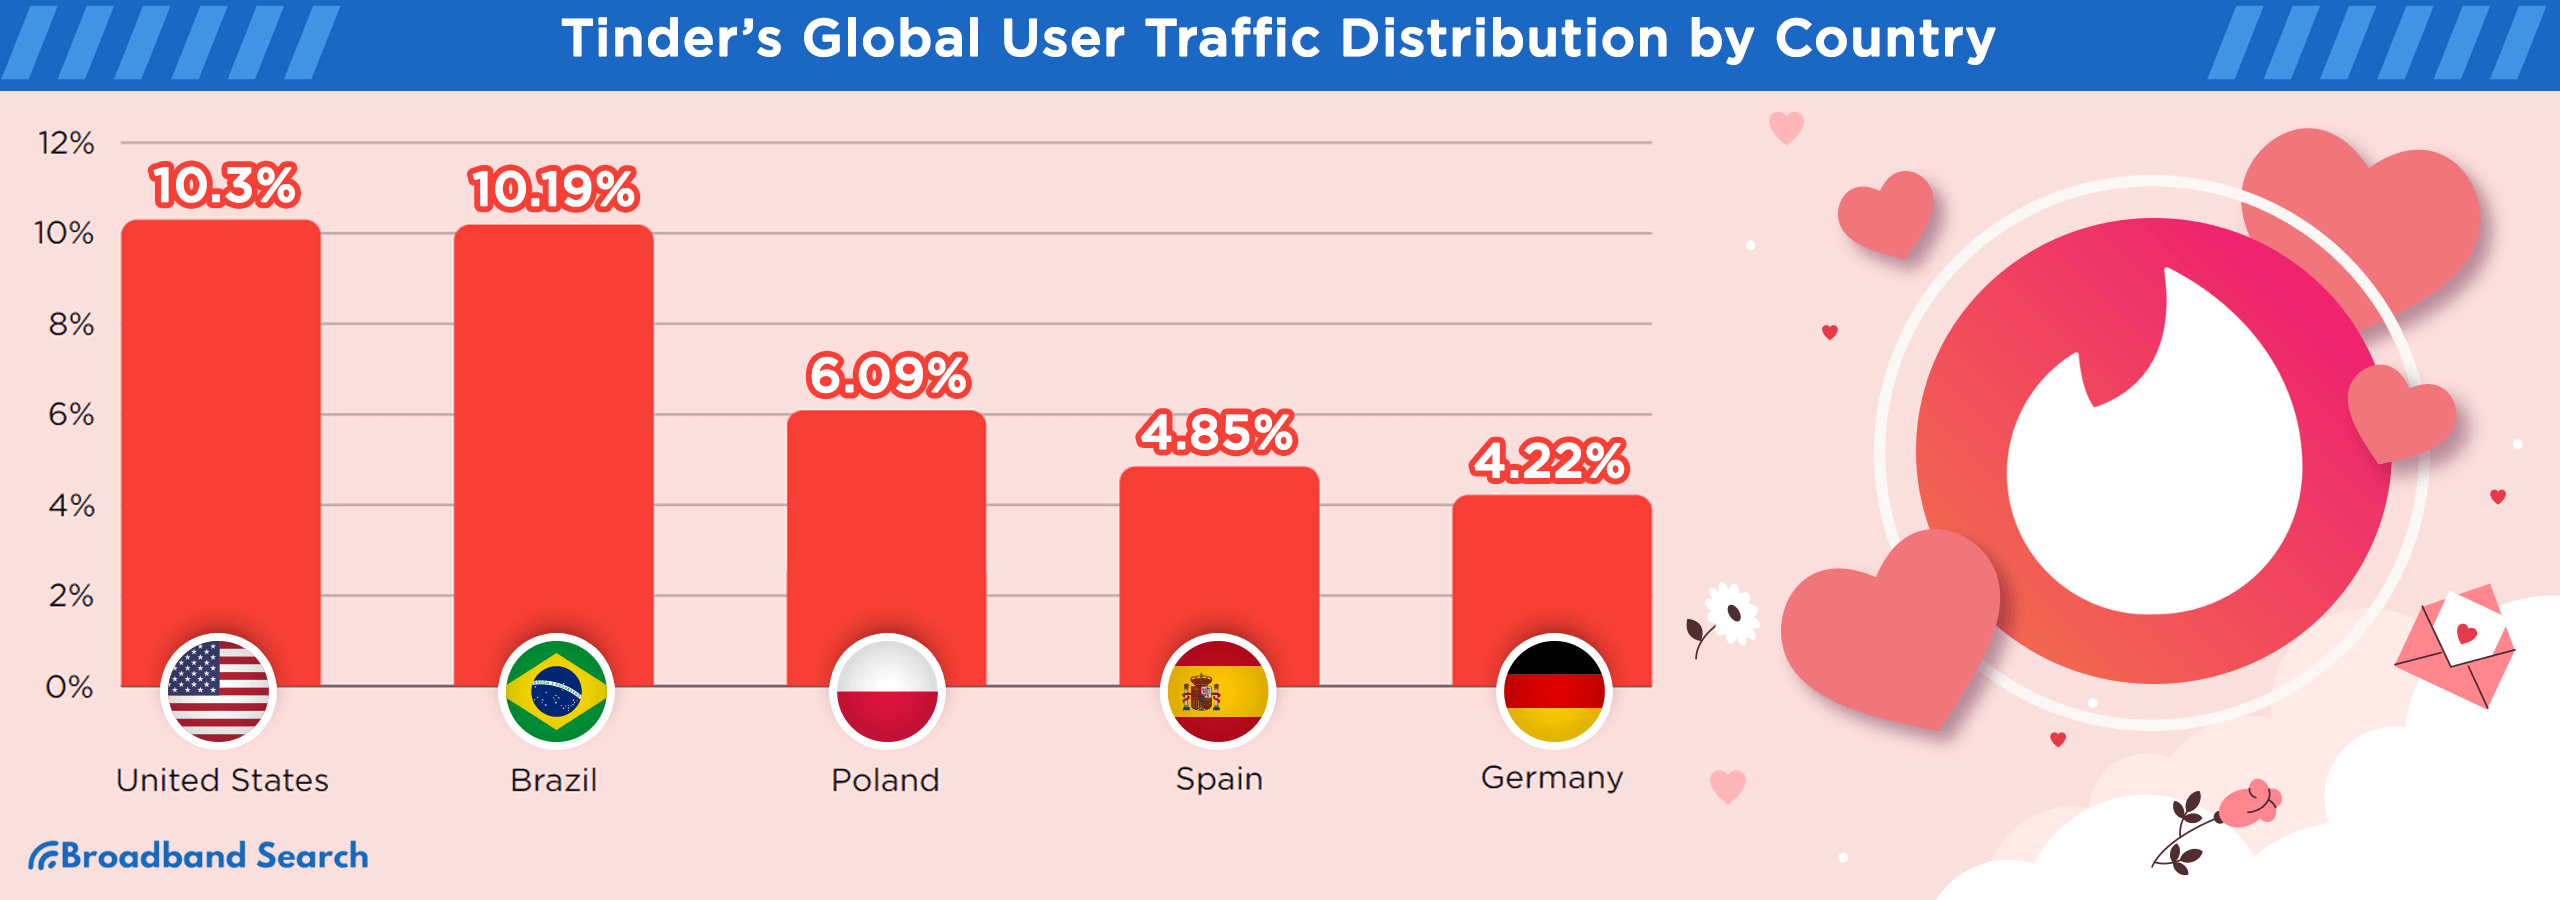 Tinder's Global user traffic distribution by country